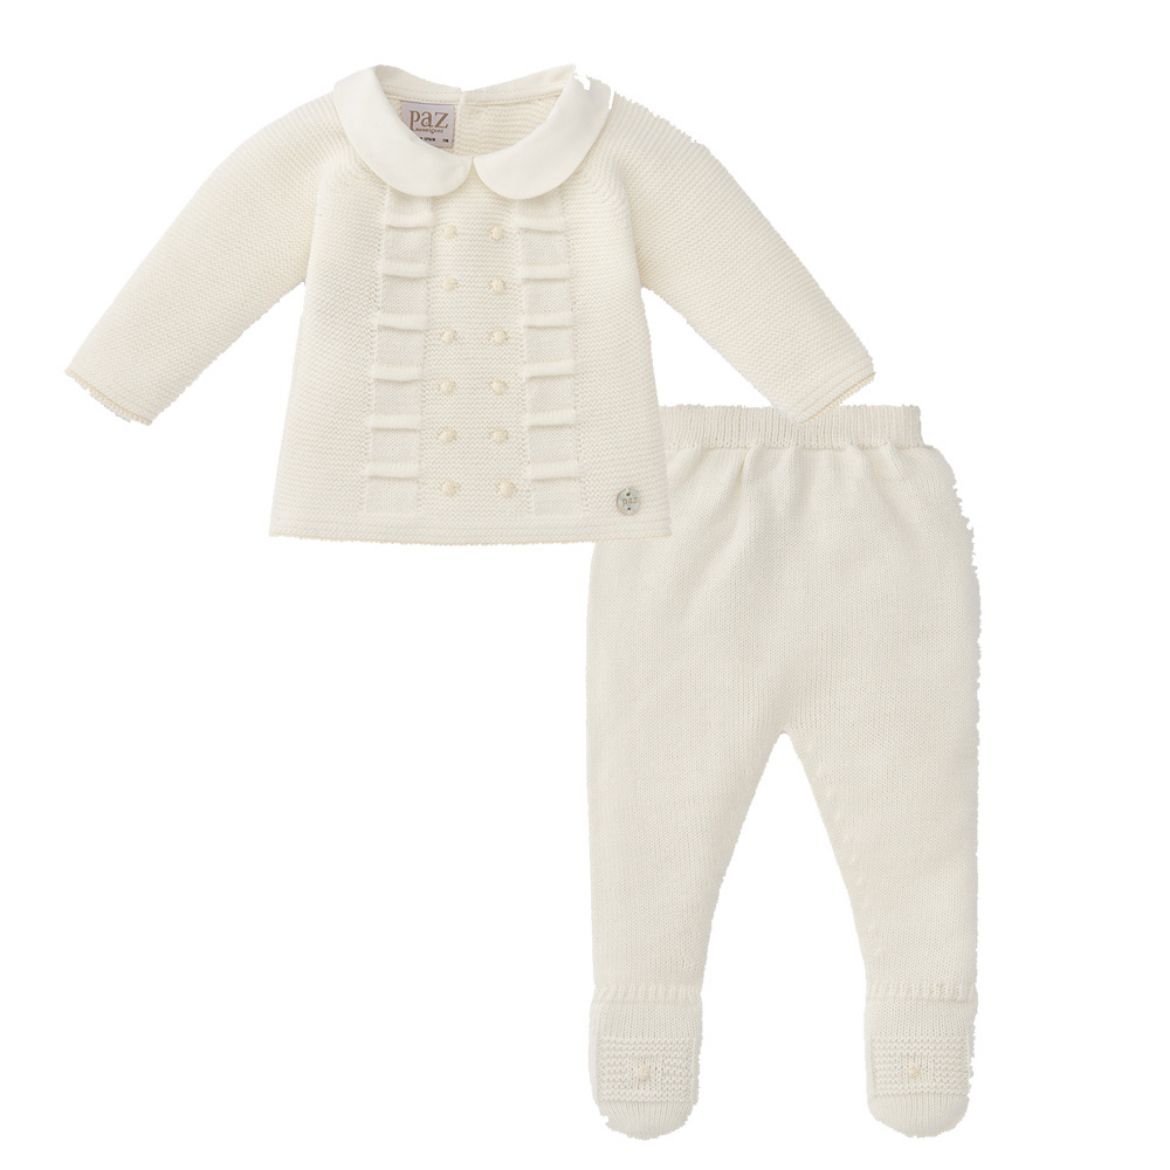 Picture of Paz Rodriguez Baby Boys Cream Knitted Set